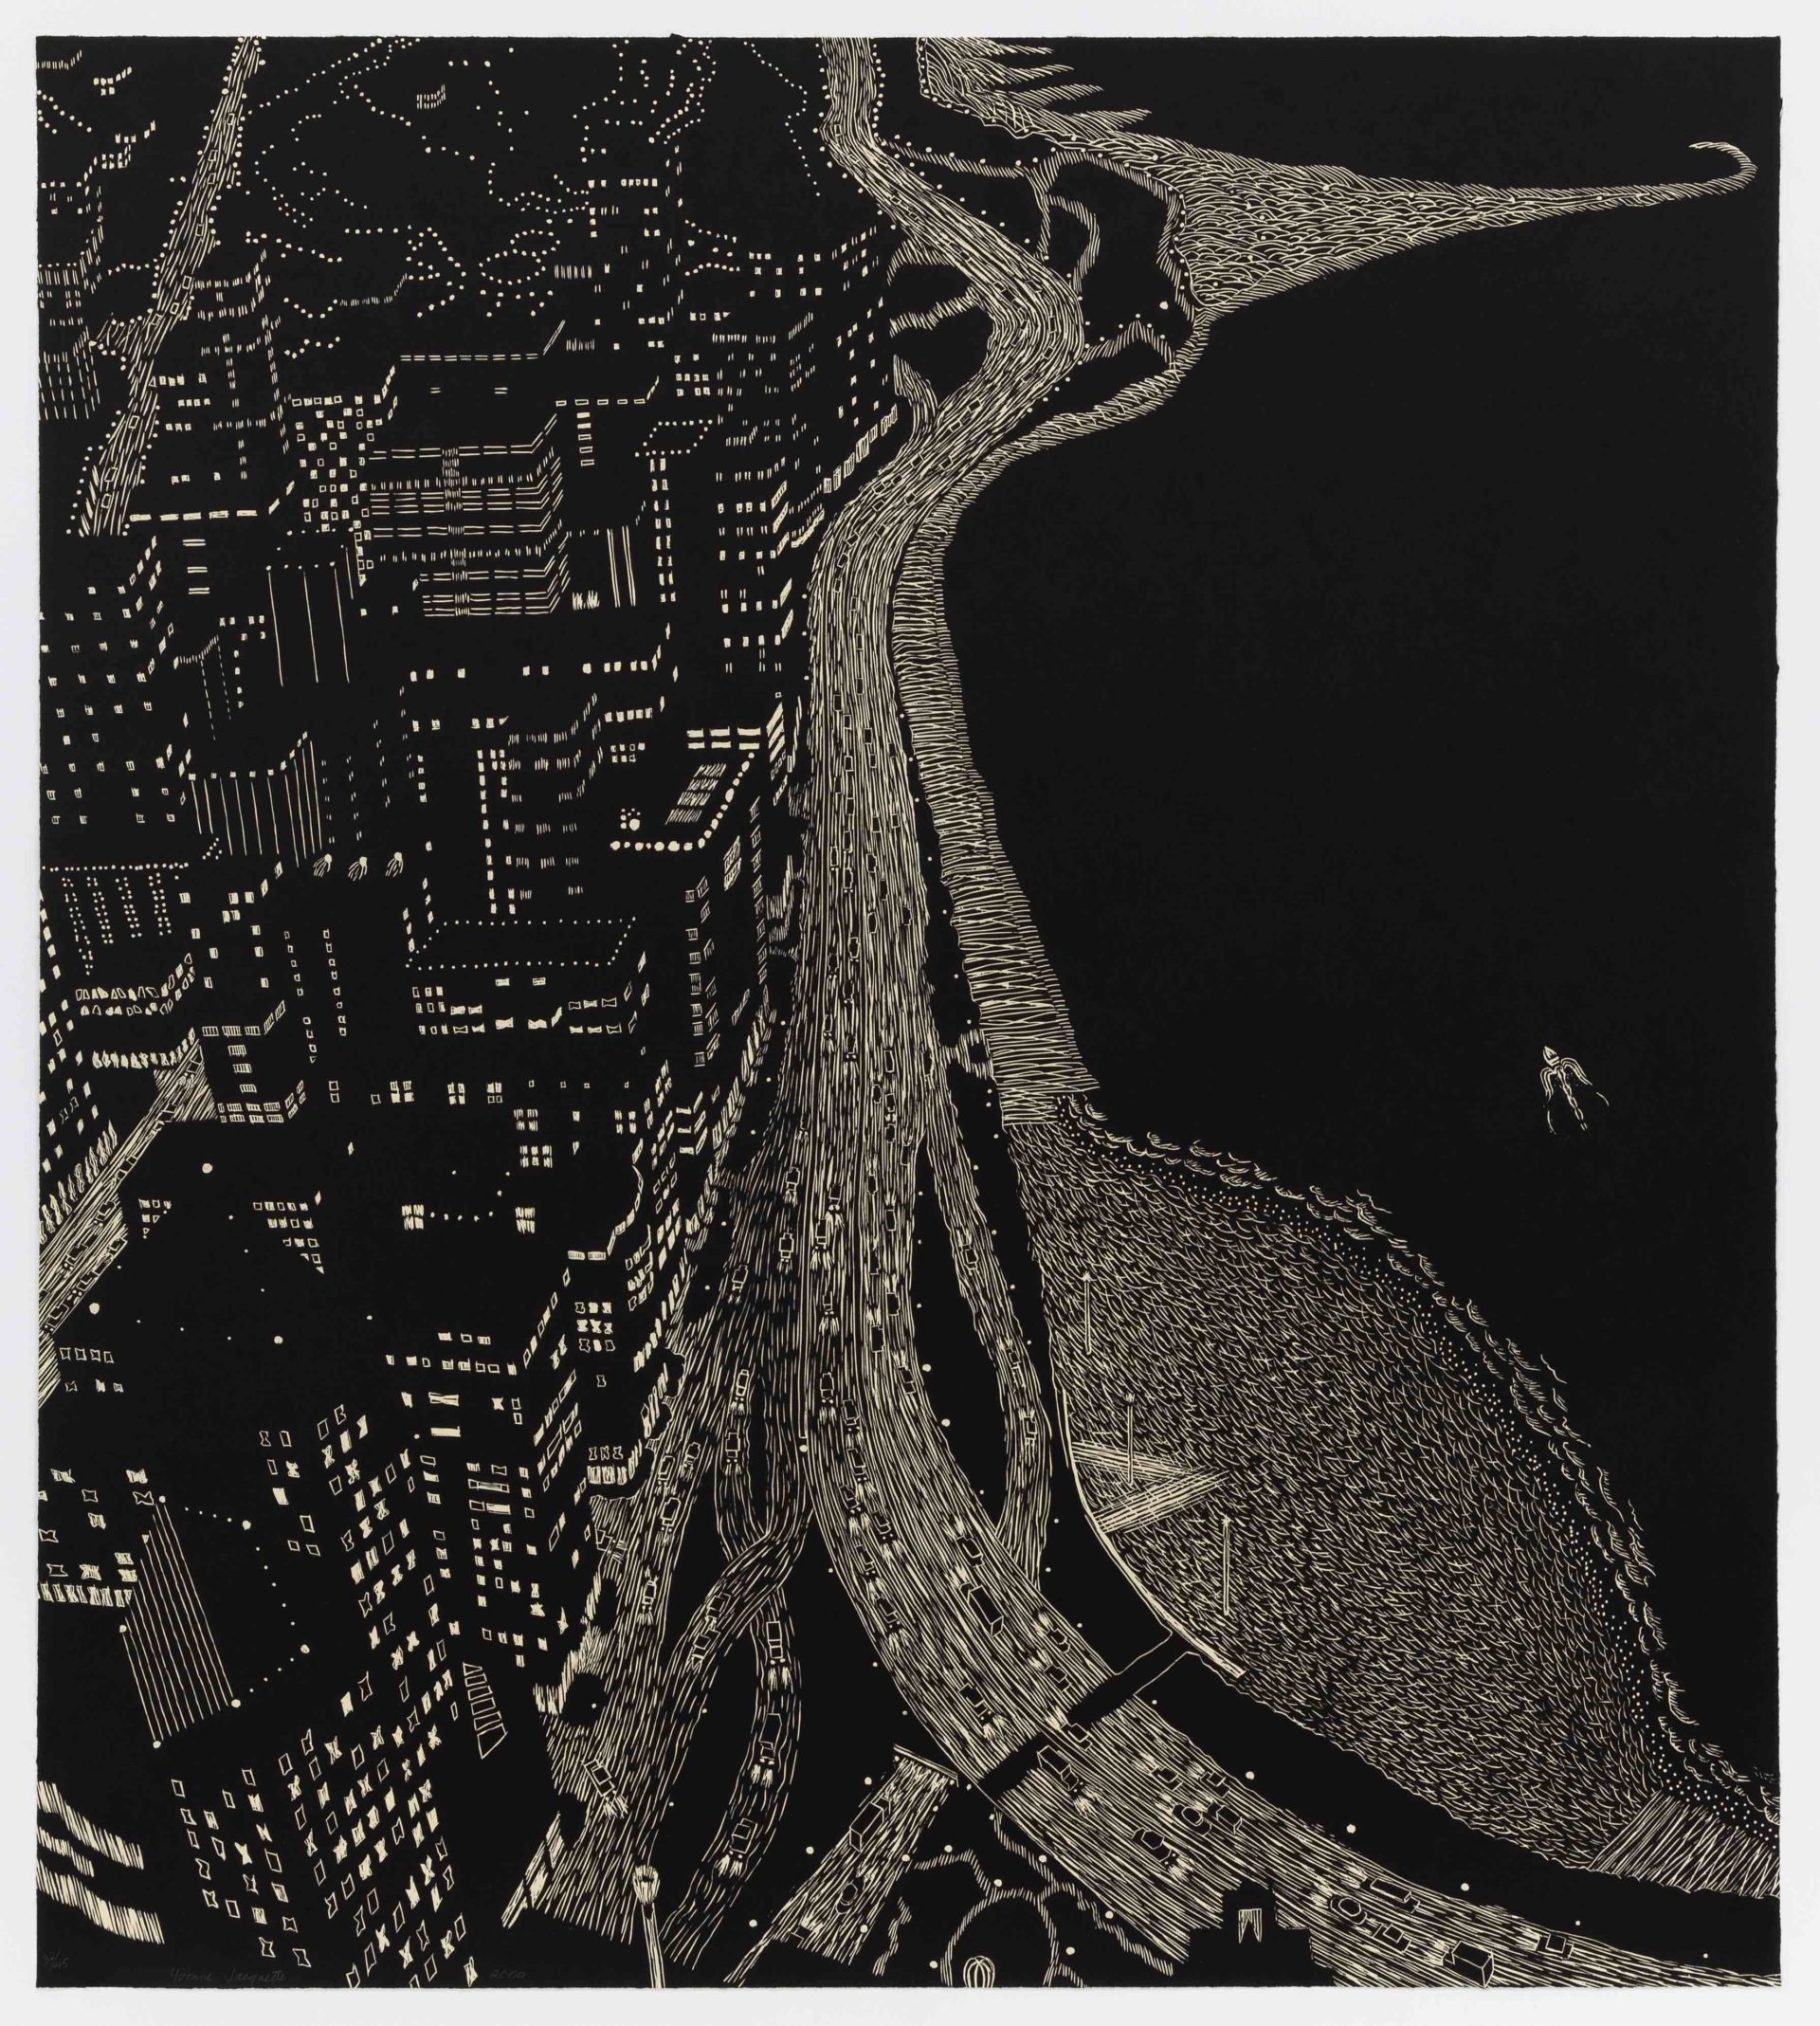 Filaments of Light (Chicago), 2000, Woodcut, 37 x 33 1/2 inches (94 x 85.1 cm), Edition of 45